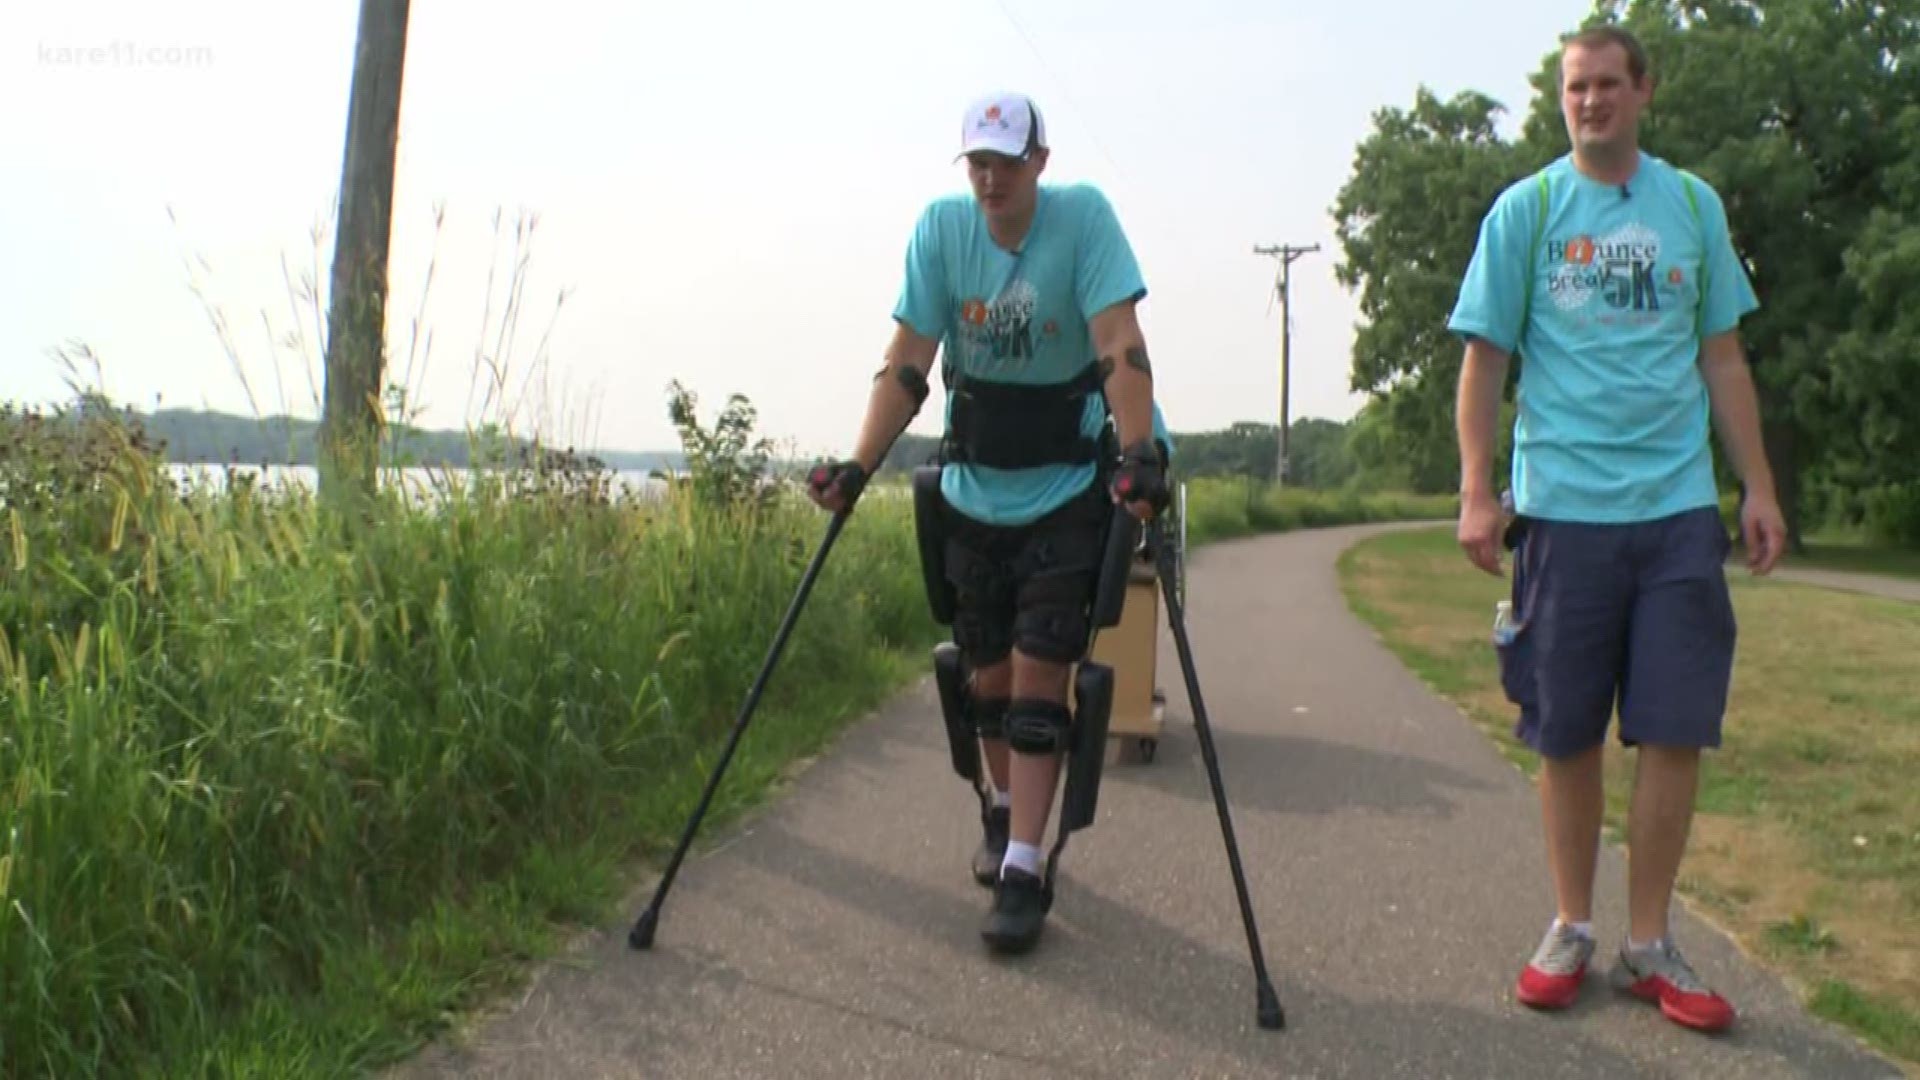 A Cambridge man, paralyzed from the waist down, crossed the finish line on his own two feet during Spare Key's 5K this past Sunday. https://kare11.tv/2Buphyf